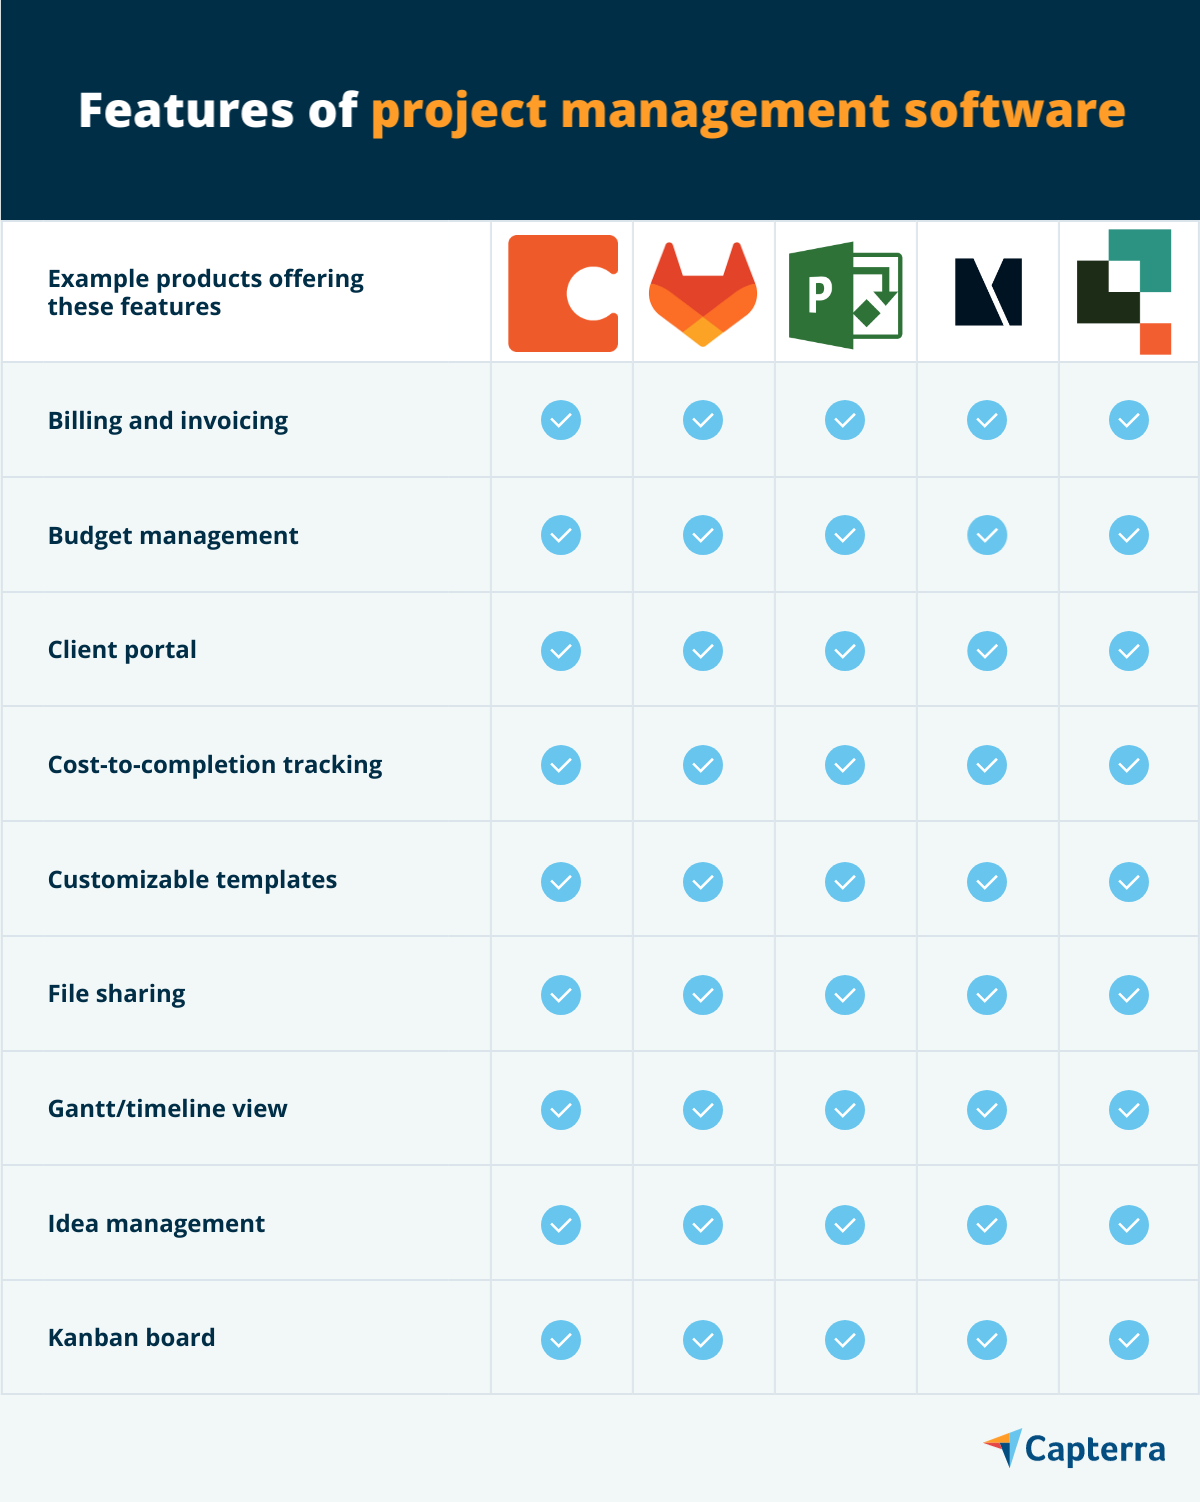 PM features graphic for the blog article "Category Compare: Project Management vs. Task Management Software"